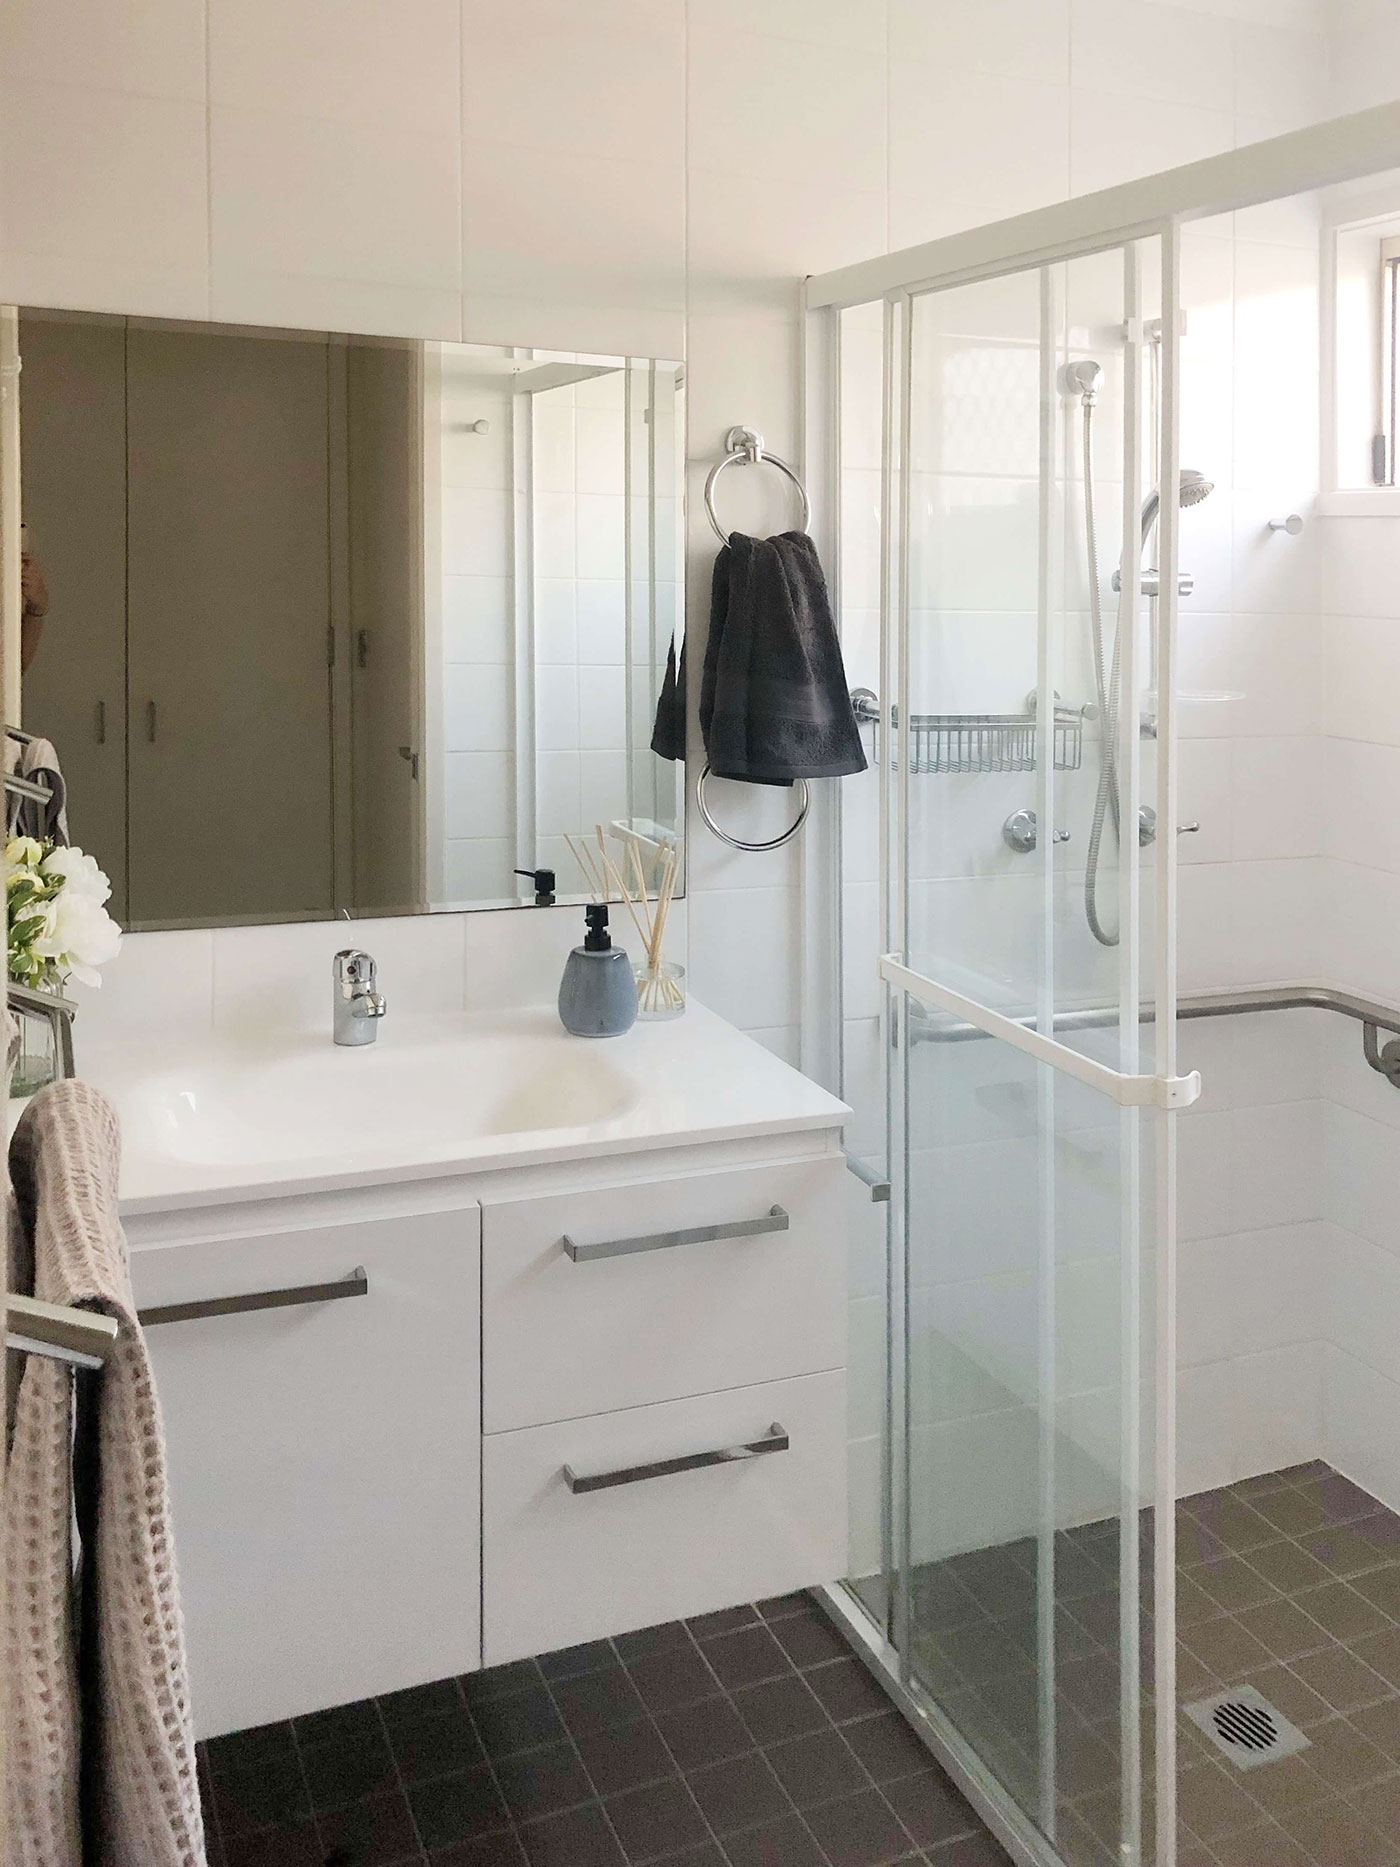 The modern bathroom inside of a retirement unit at Whiddon Redhead, an aged care home in Newcastle, NSW.